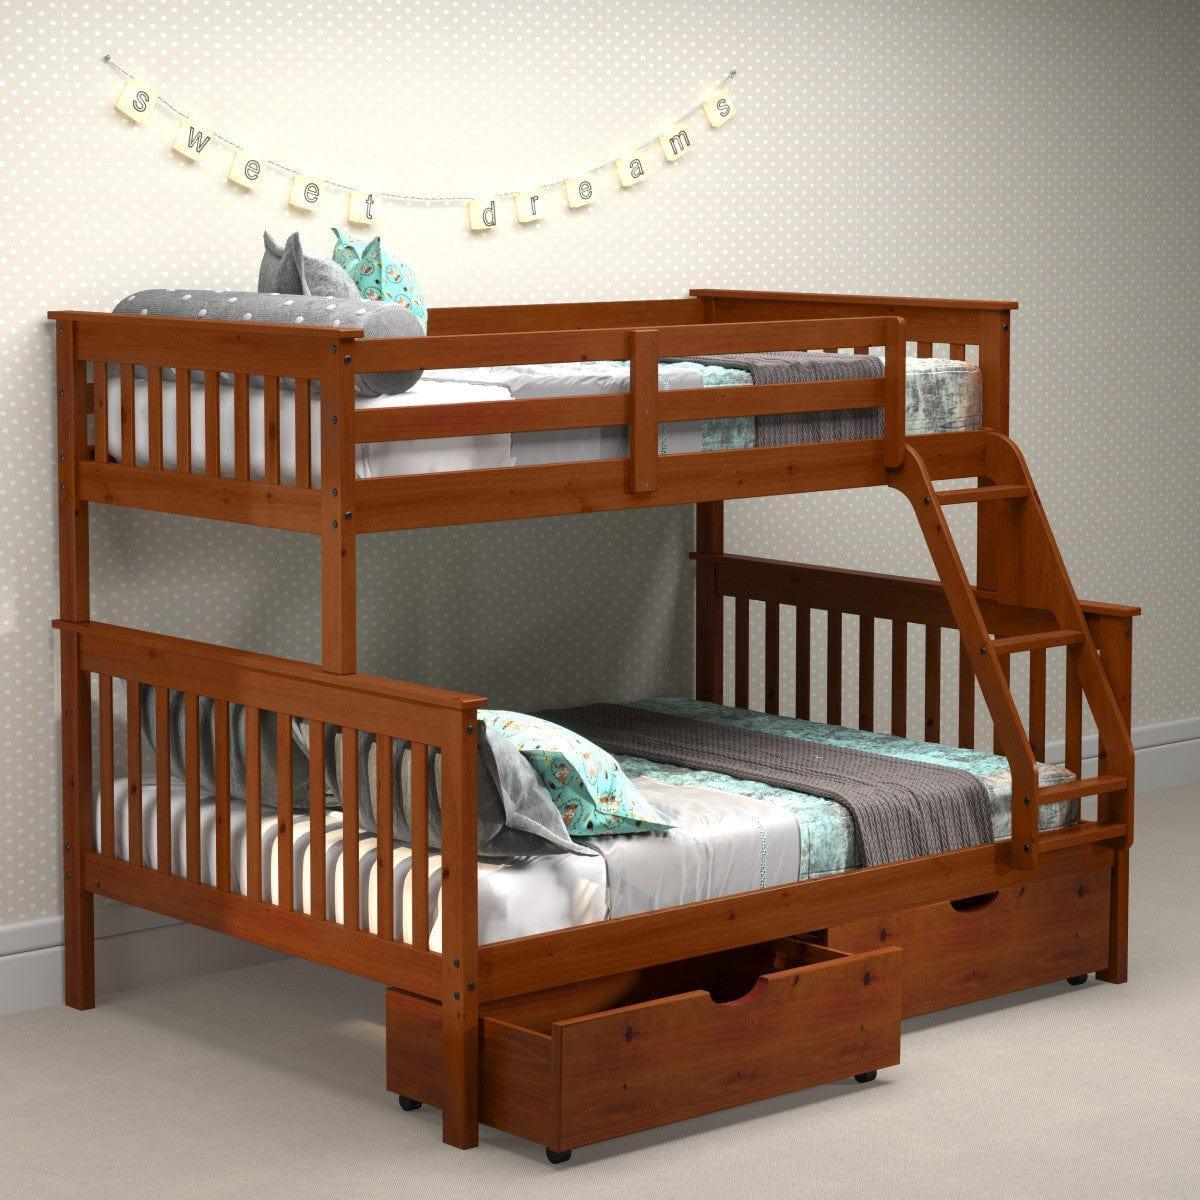 Donco  Twin/Full Mission Bunkbed With Dual Underbed Drawers Espresso 122-3-TFE_505-E - Bedroom Depot USA